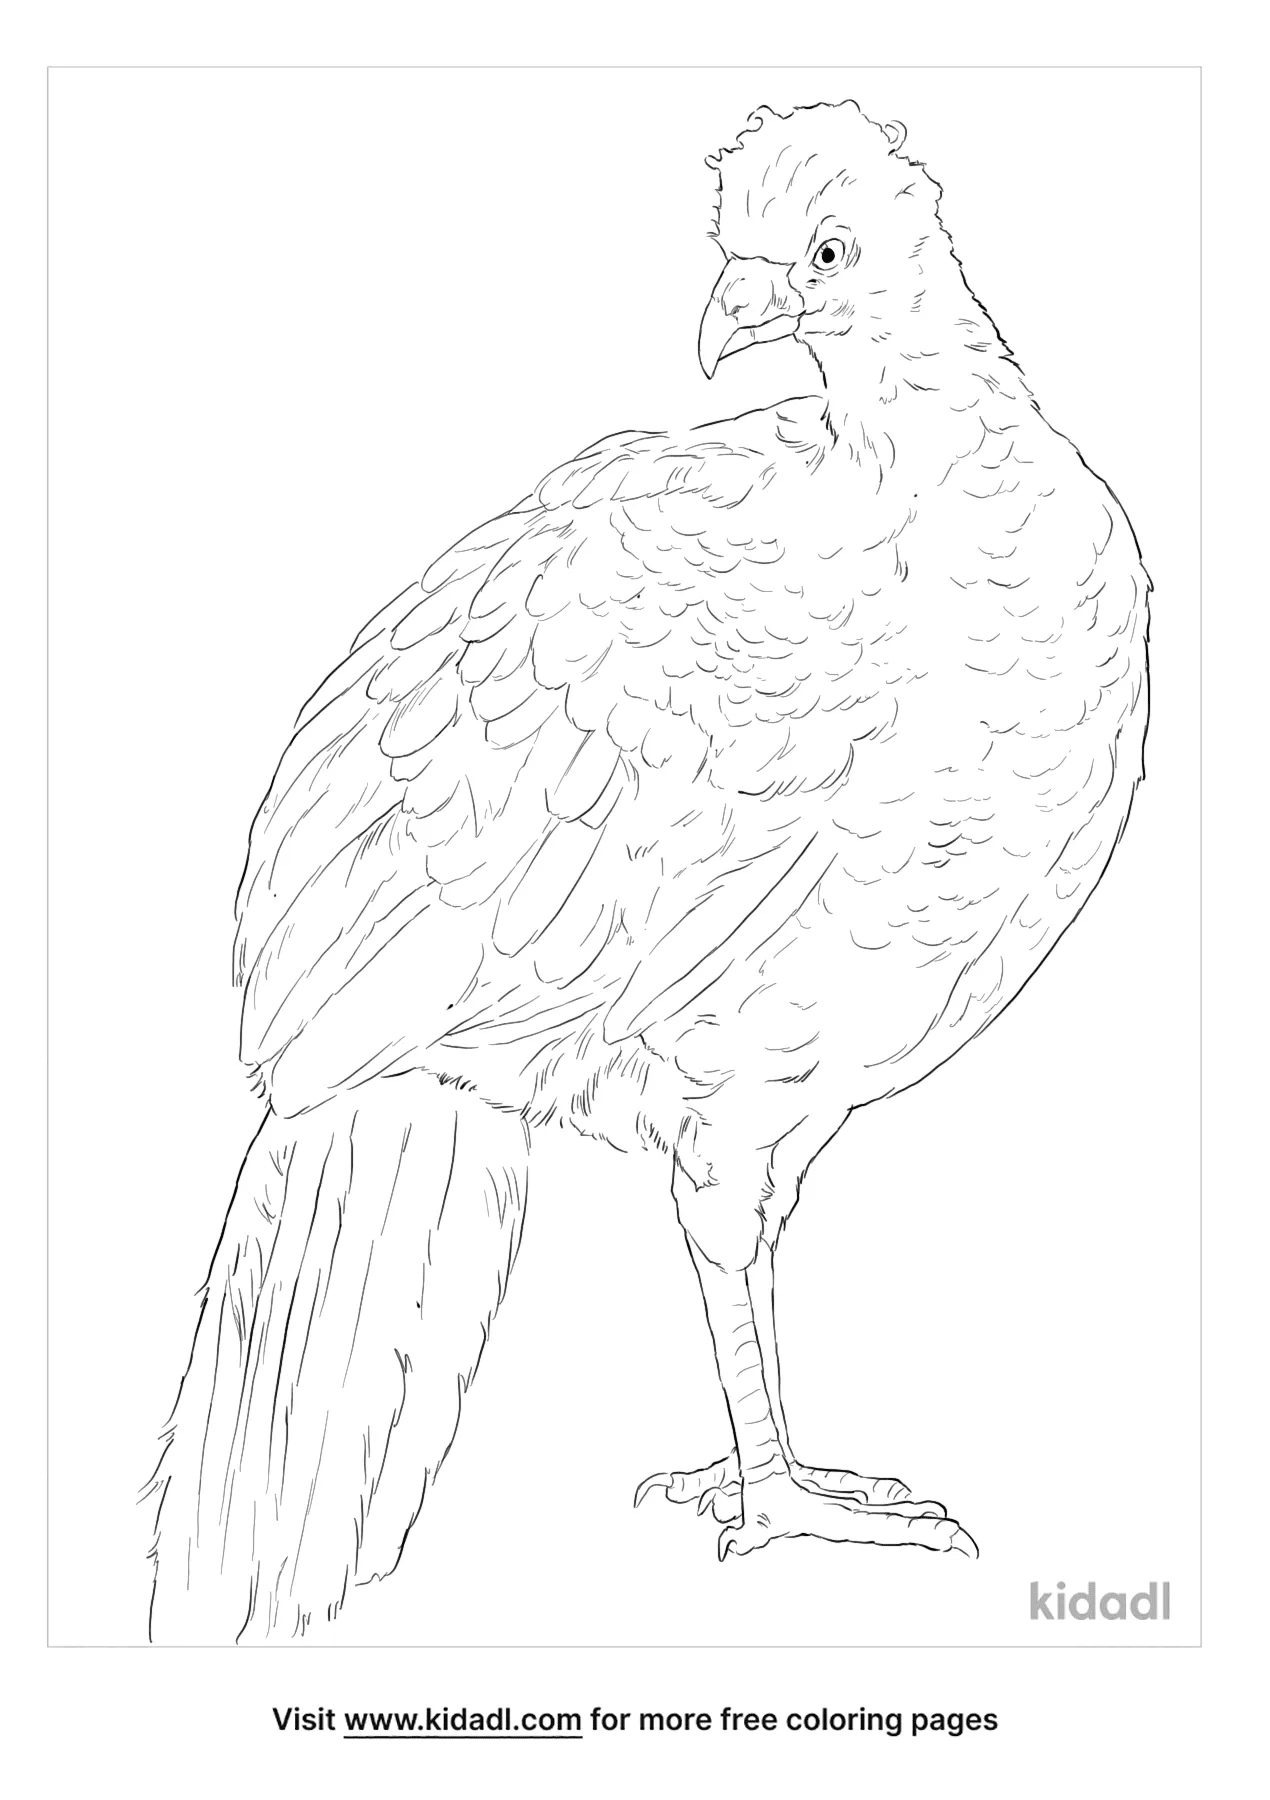 Wattled Curassow Coloring Page